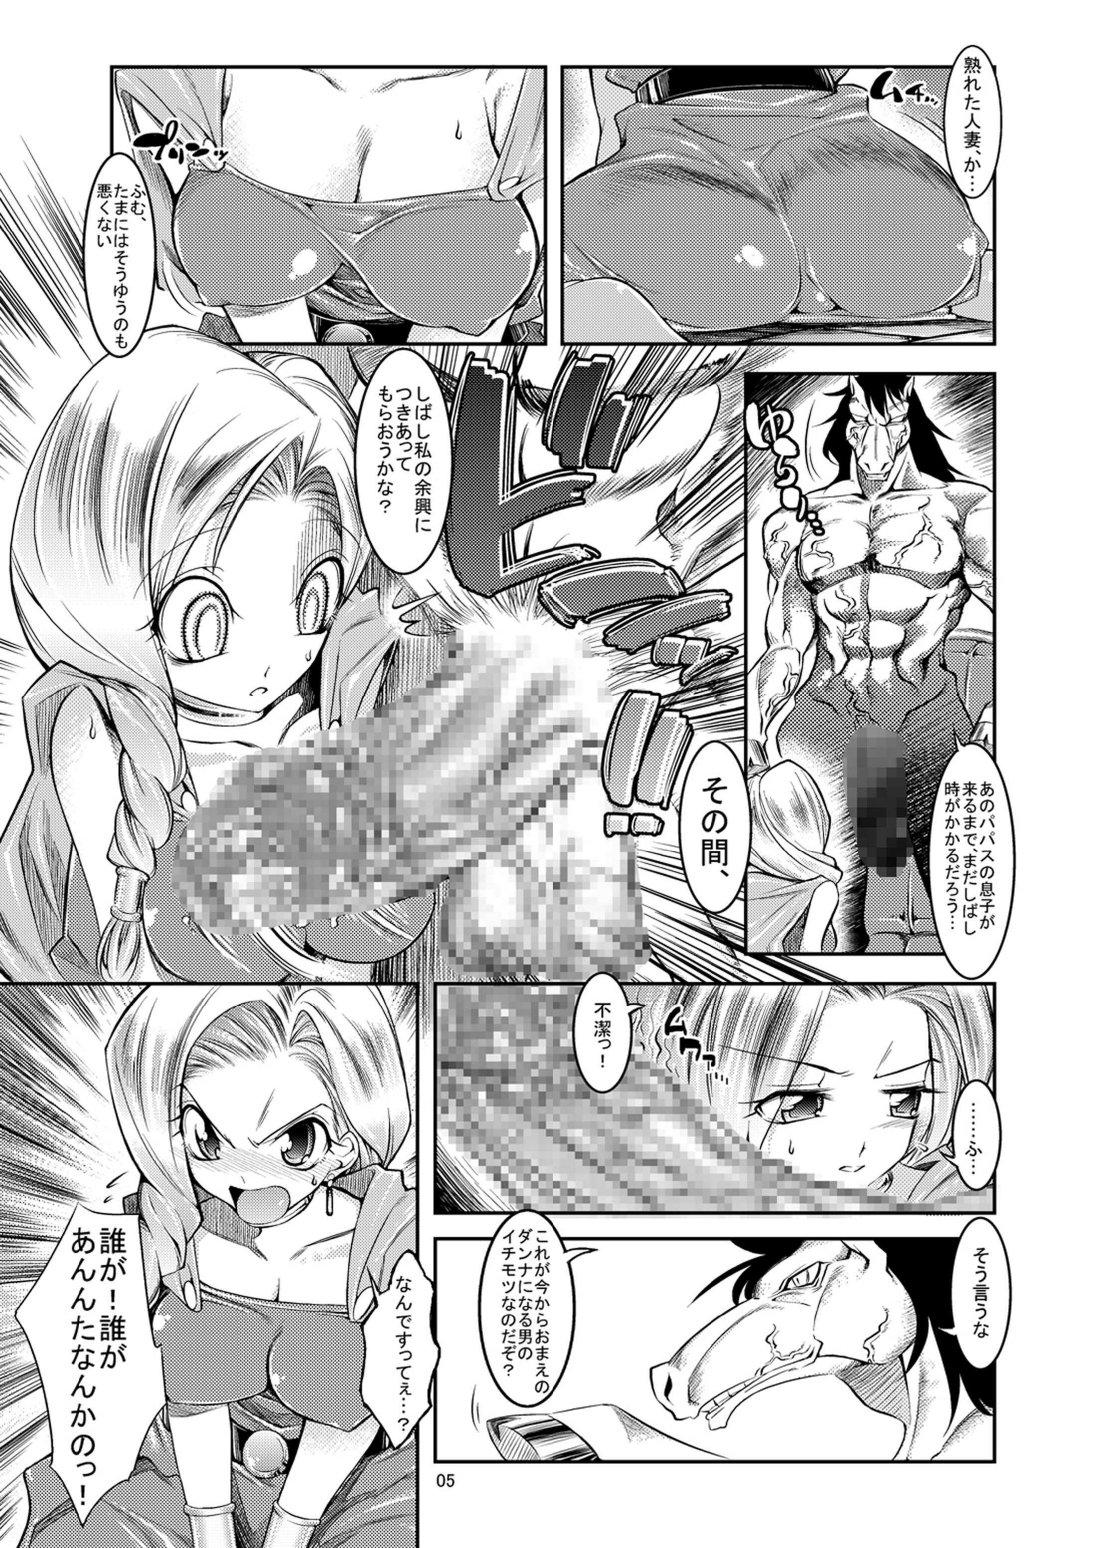 Stepbrother Medapani Quest Bianca-hen - Dragon quest v Oriental - Page 5